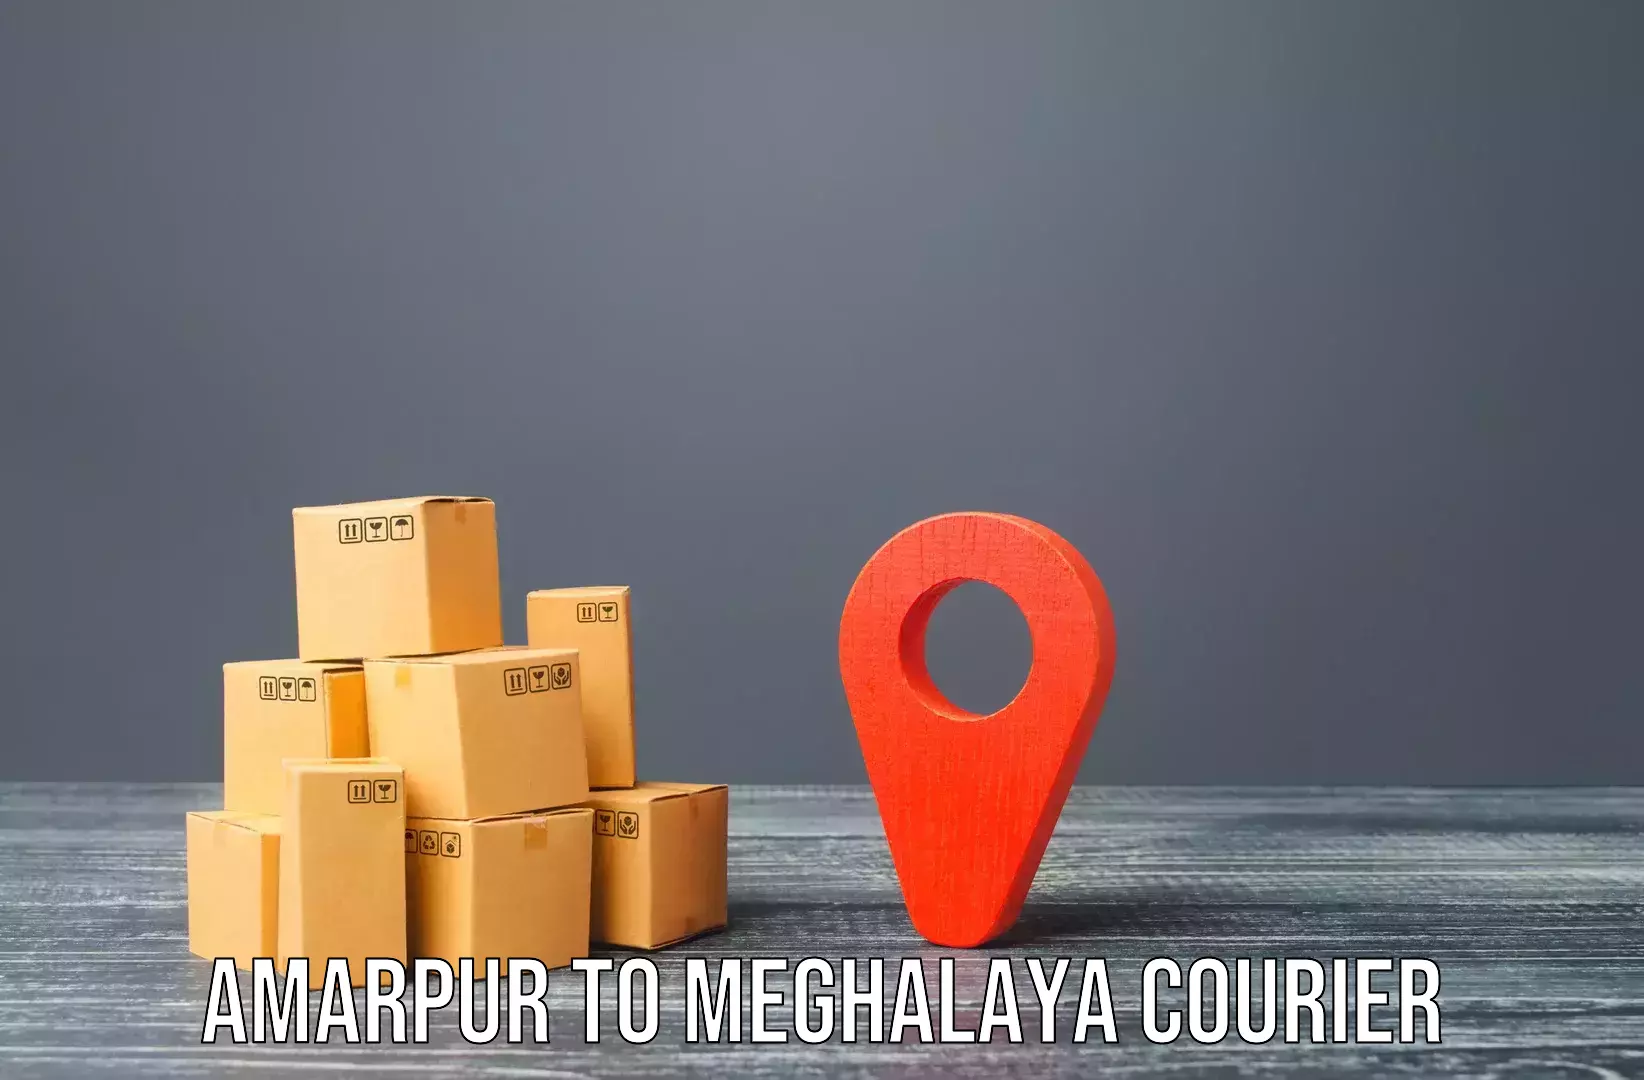 Trusted moving company Amarpur to Dkhiah West